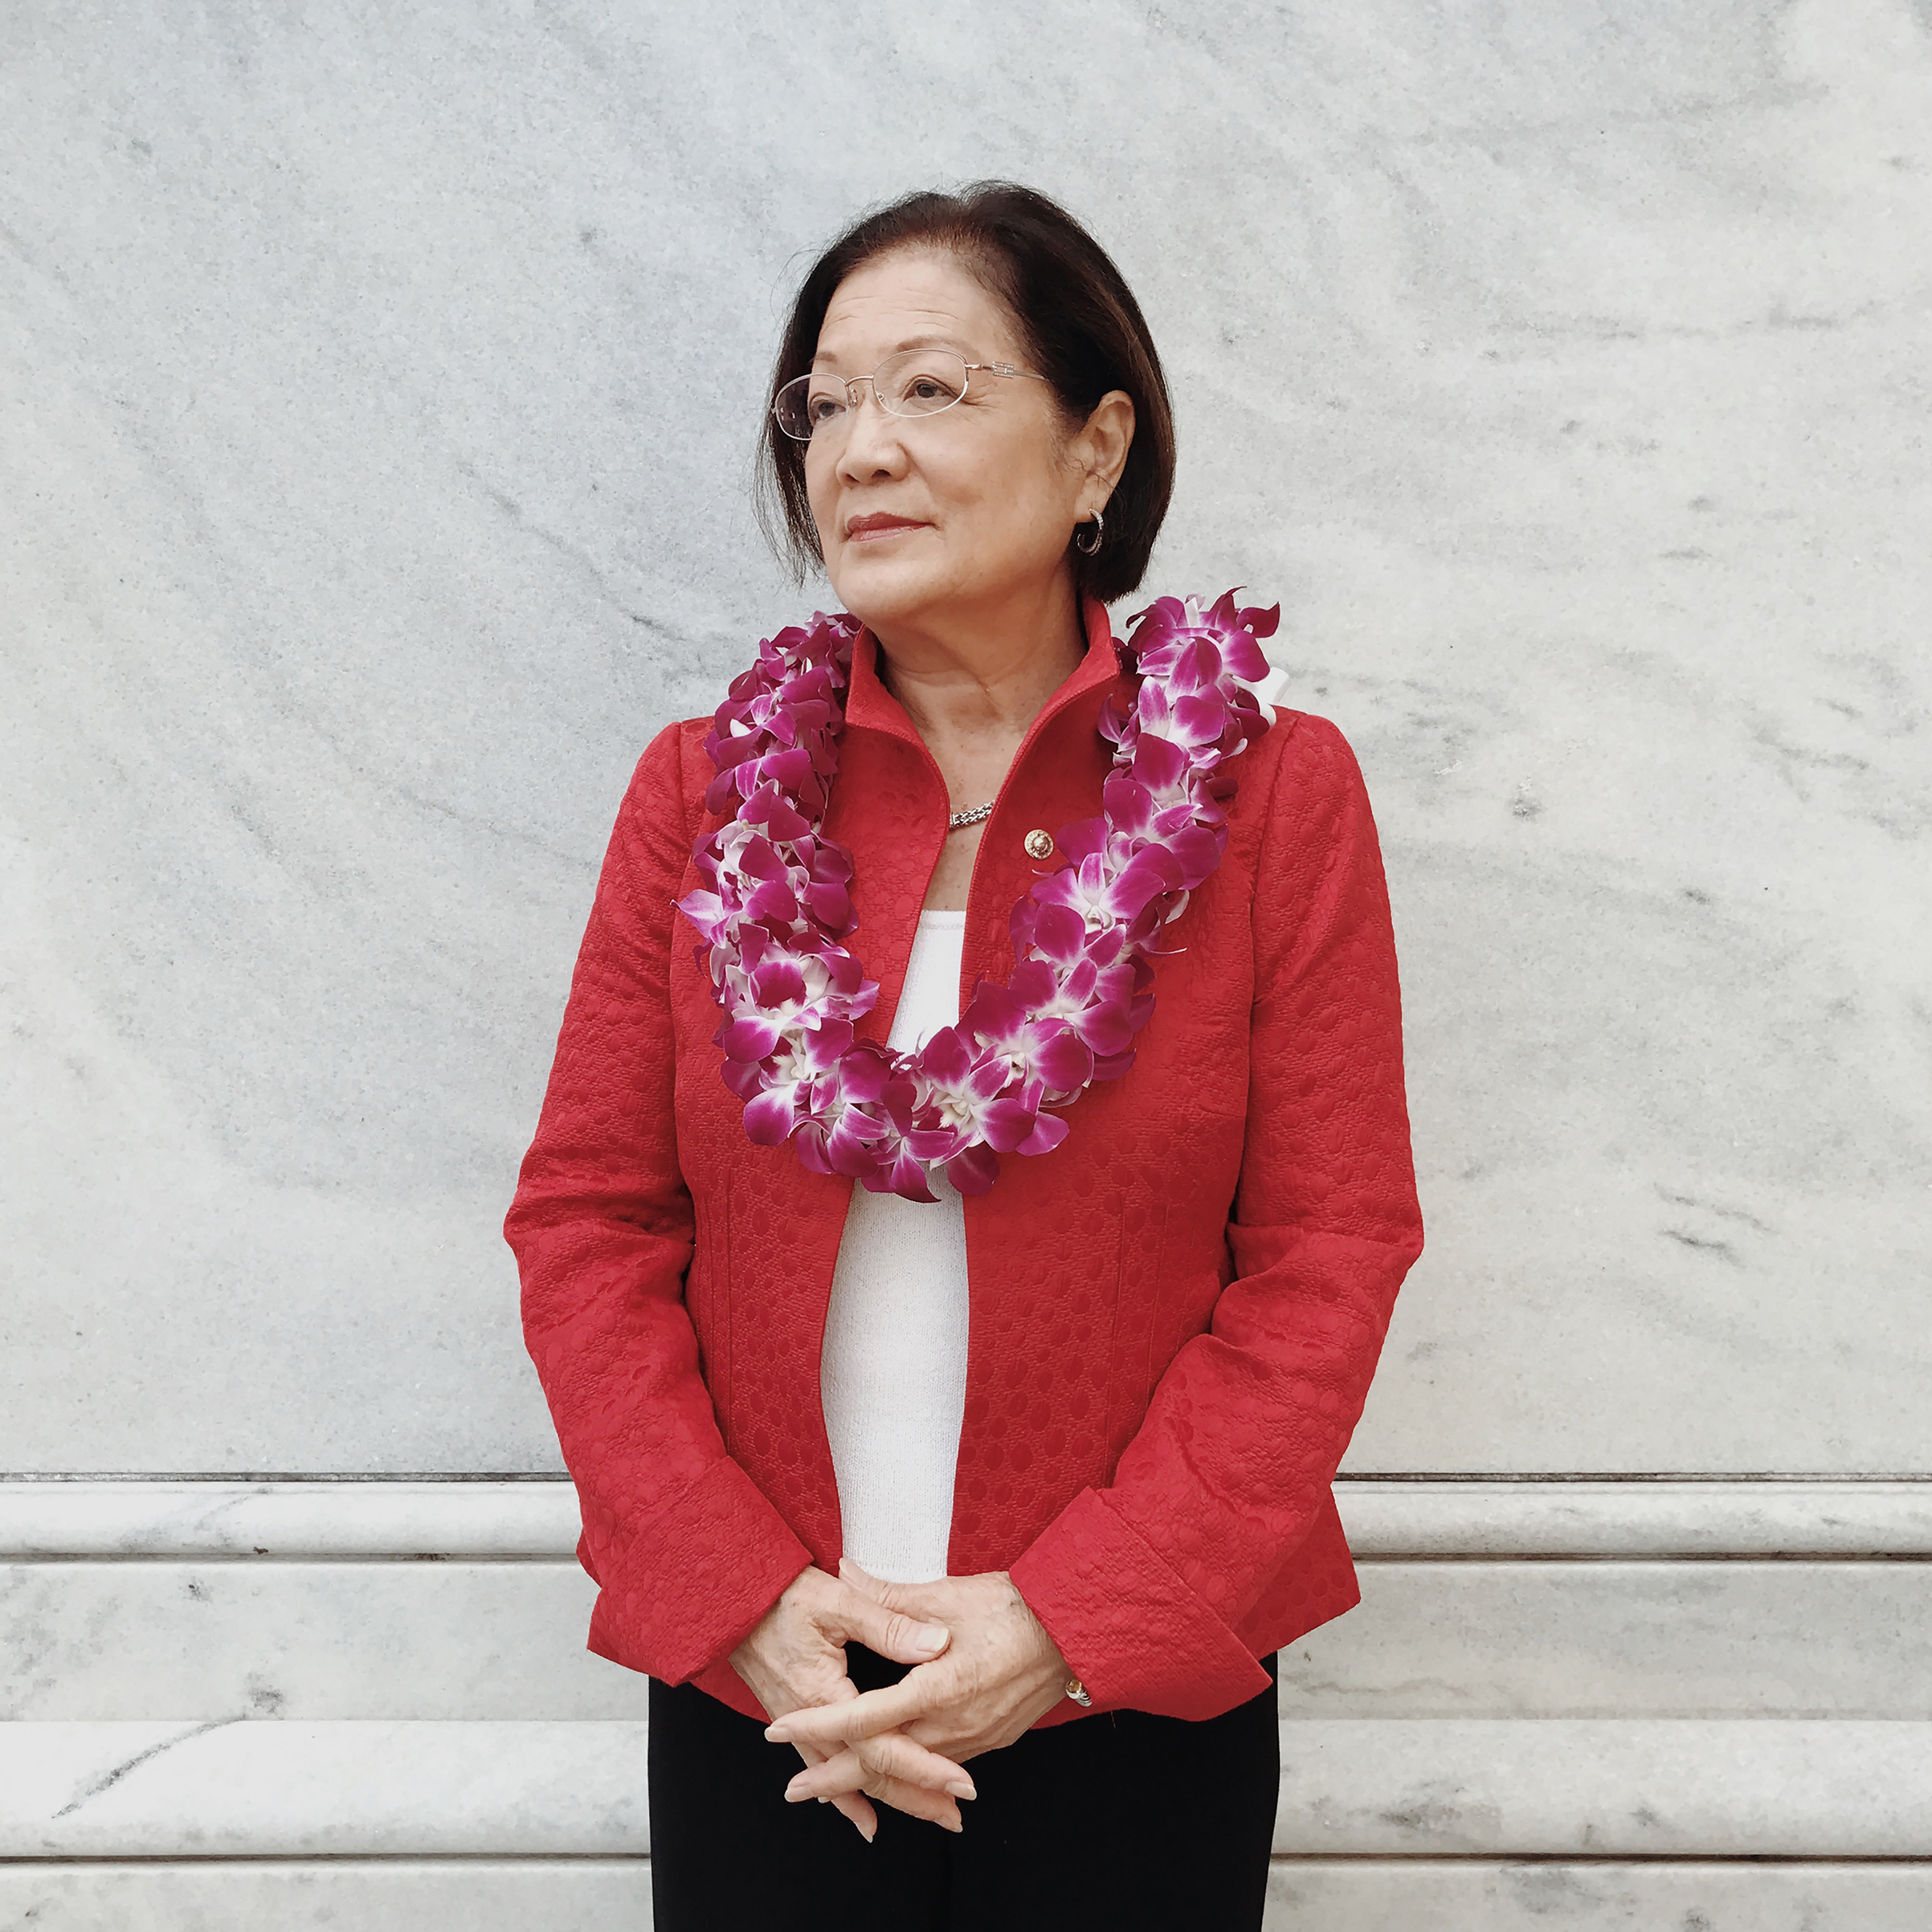 Hawaii’s Mazie Hirono is the Senate’s only immigrant and a thorn in the President’s side. Hirono is the first Asian-American woman to serve in the Senate, the first Senator born in Japan and the first Senator from a Buddhist background. (Luisa Dörr for TIME)